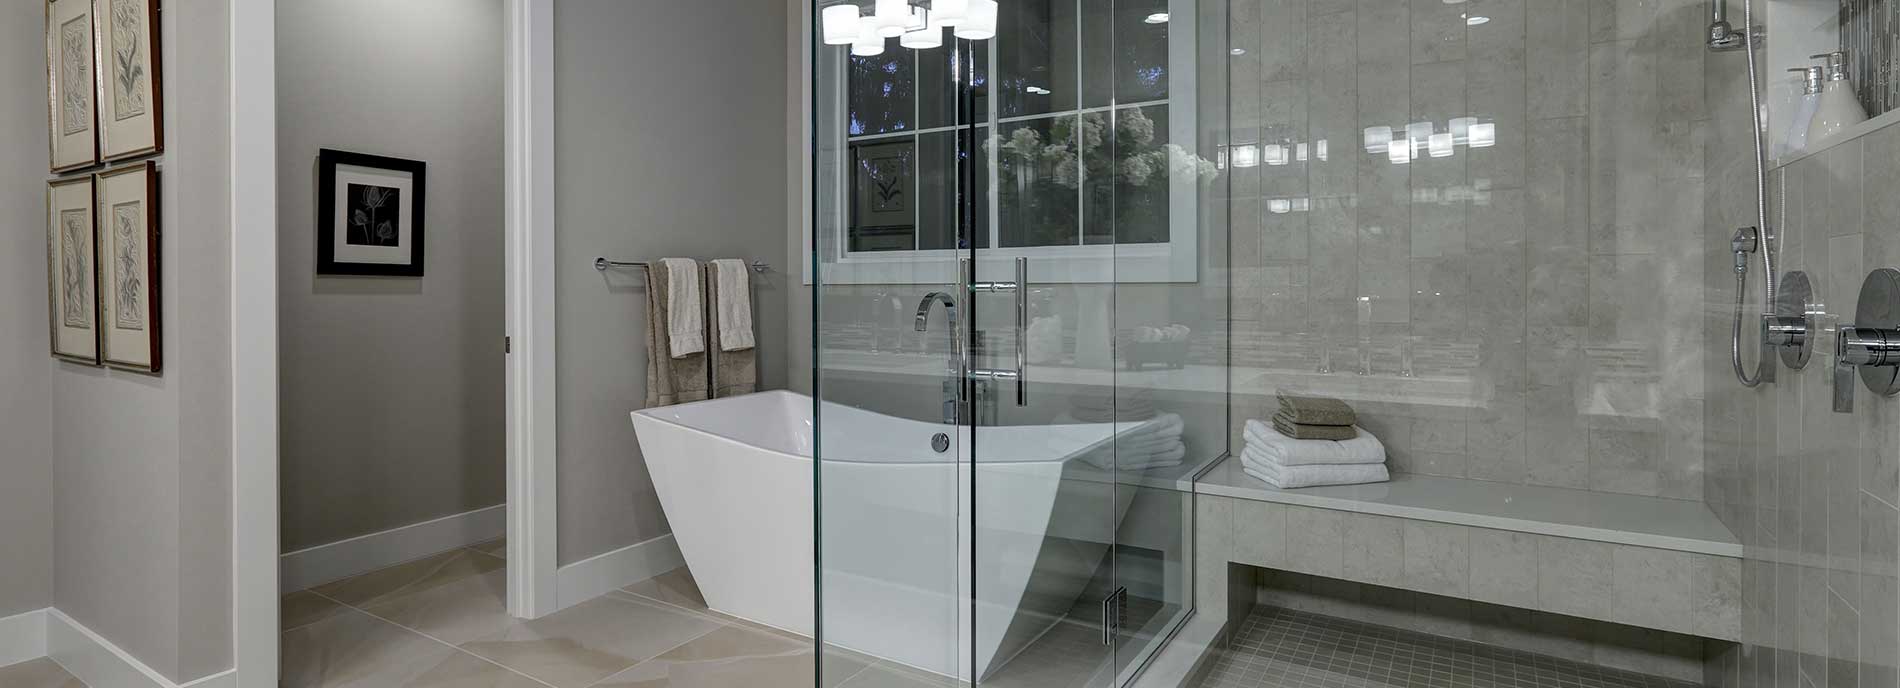 White bathtub and clear glass shower